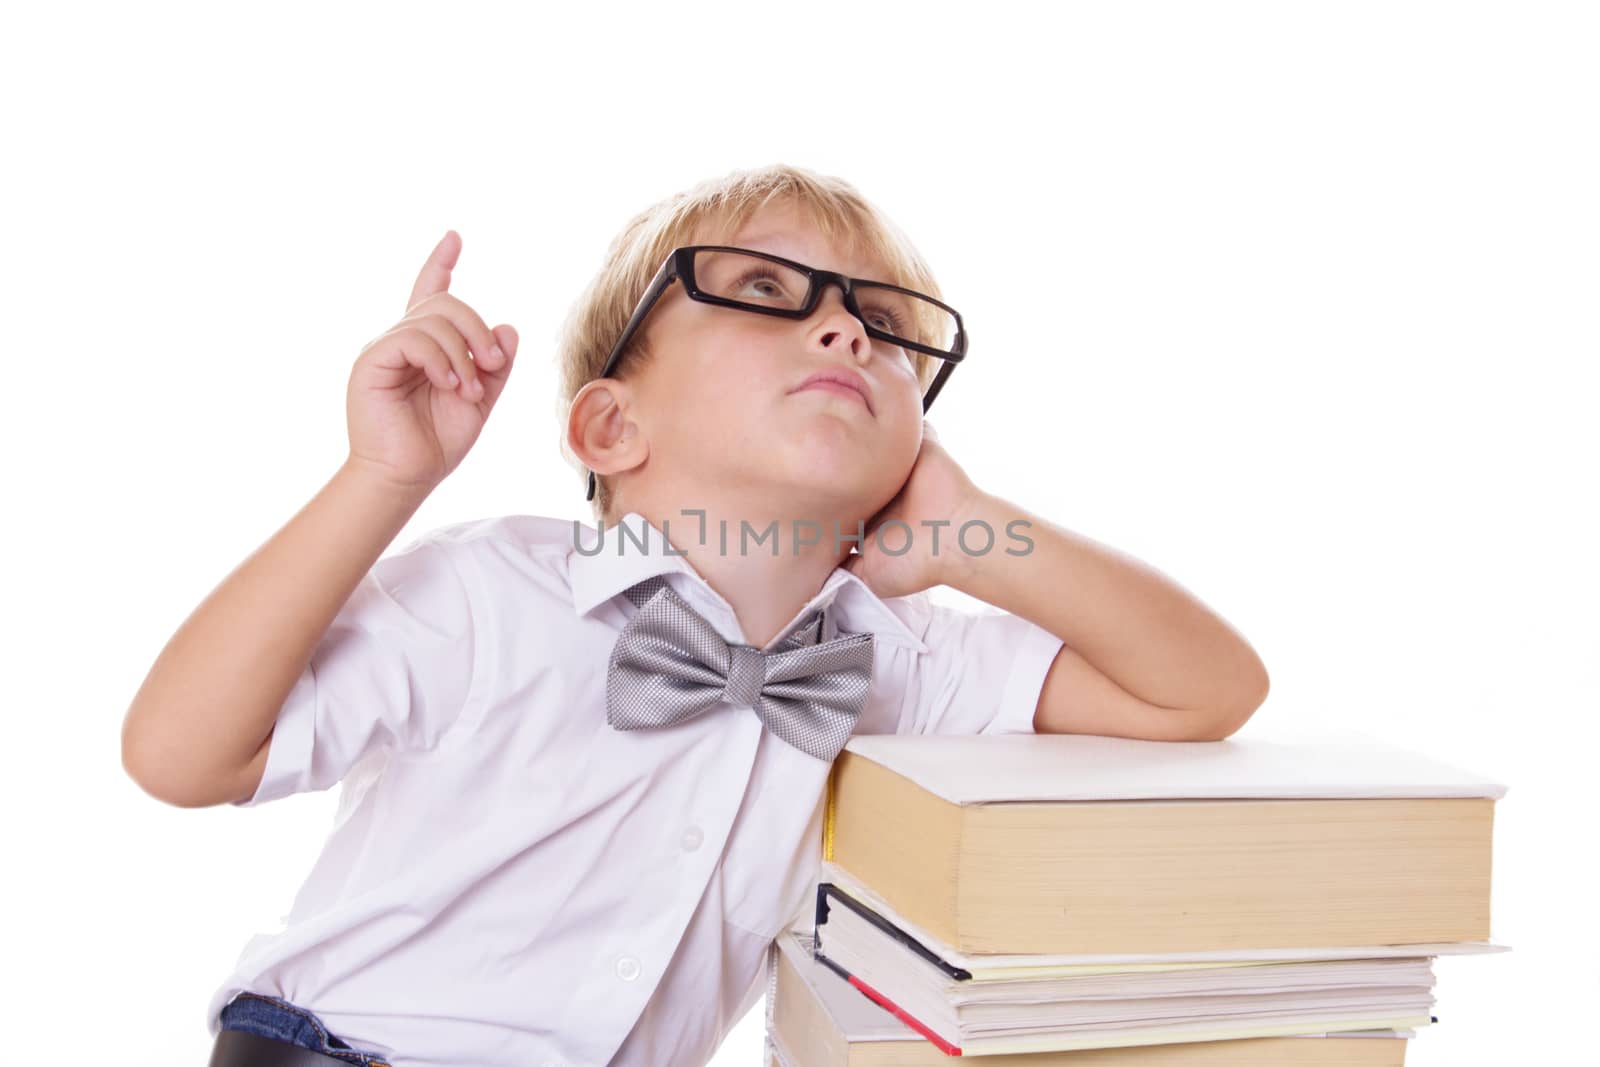 Boy with bow-tie and glasses sitting on books having idea by Angel_a